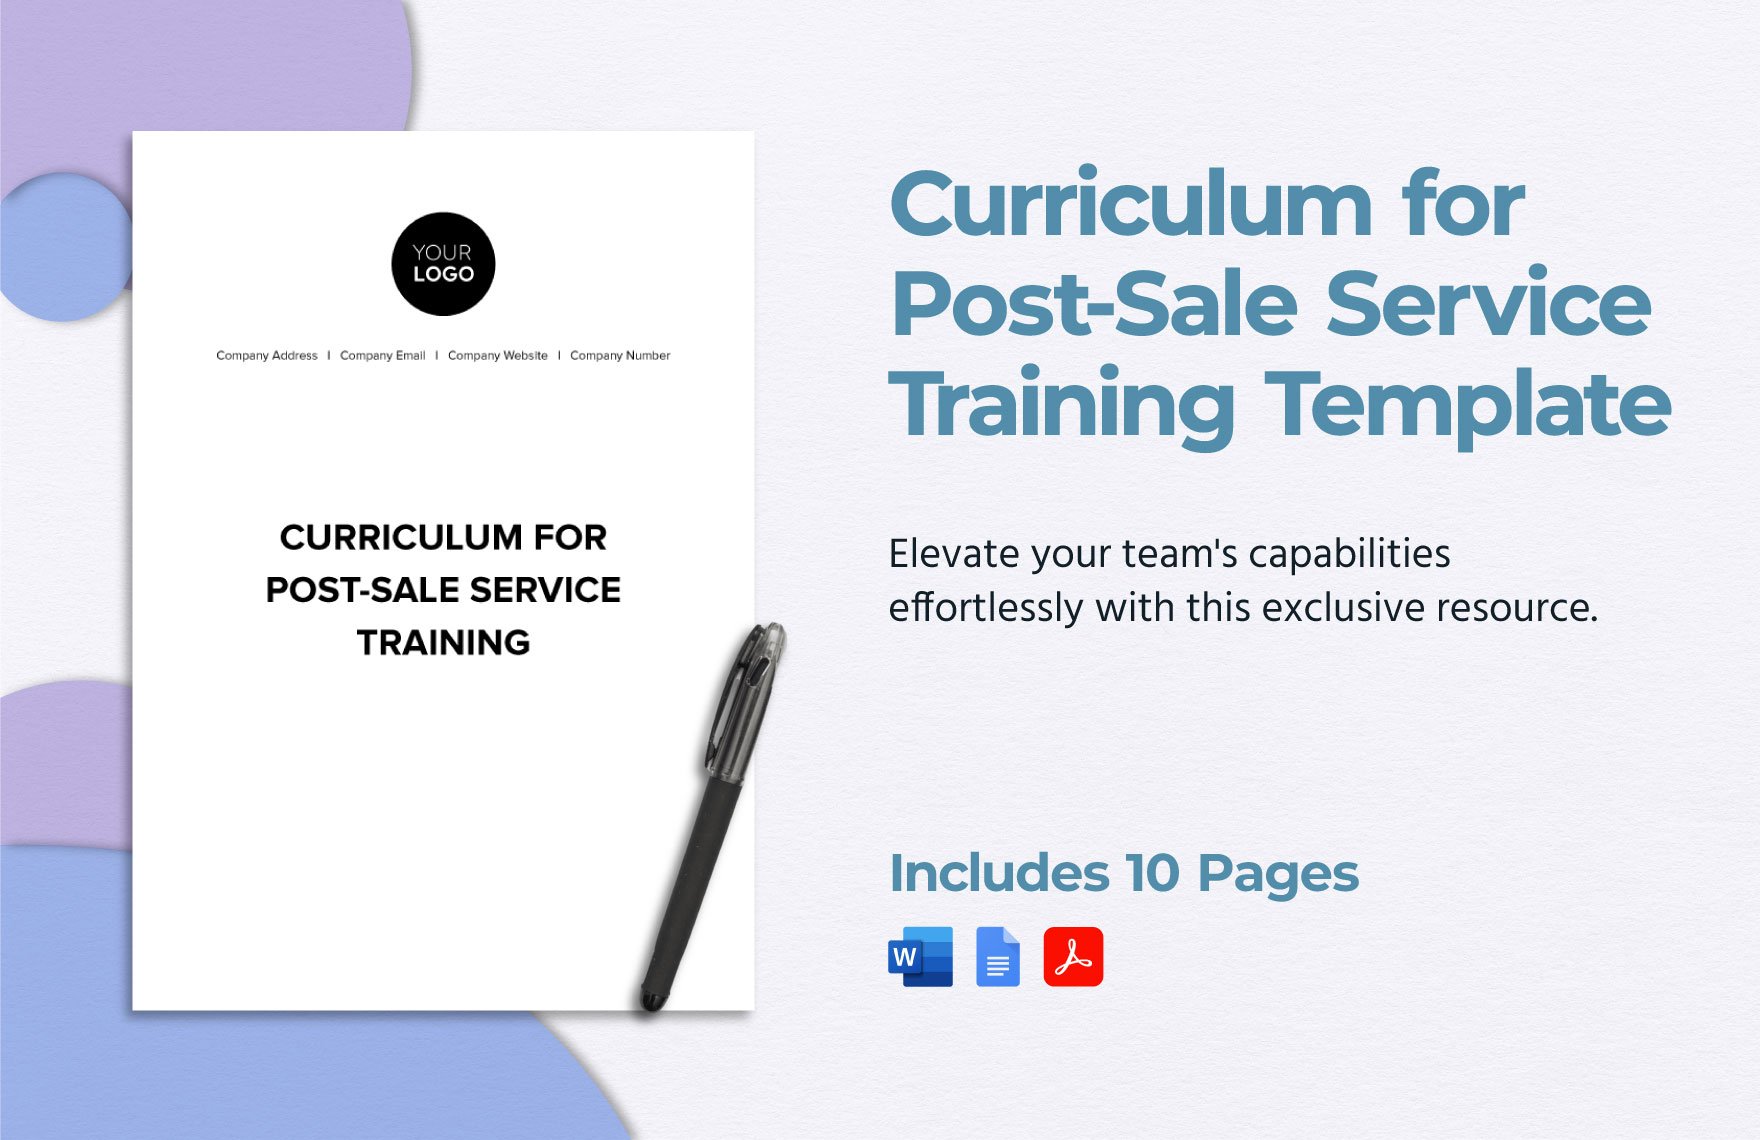 Curriculum for Post-Sale Service Training Template